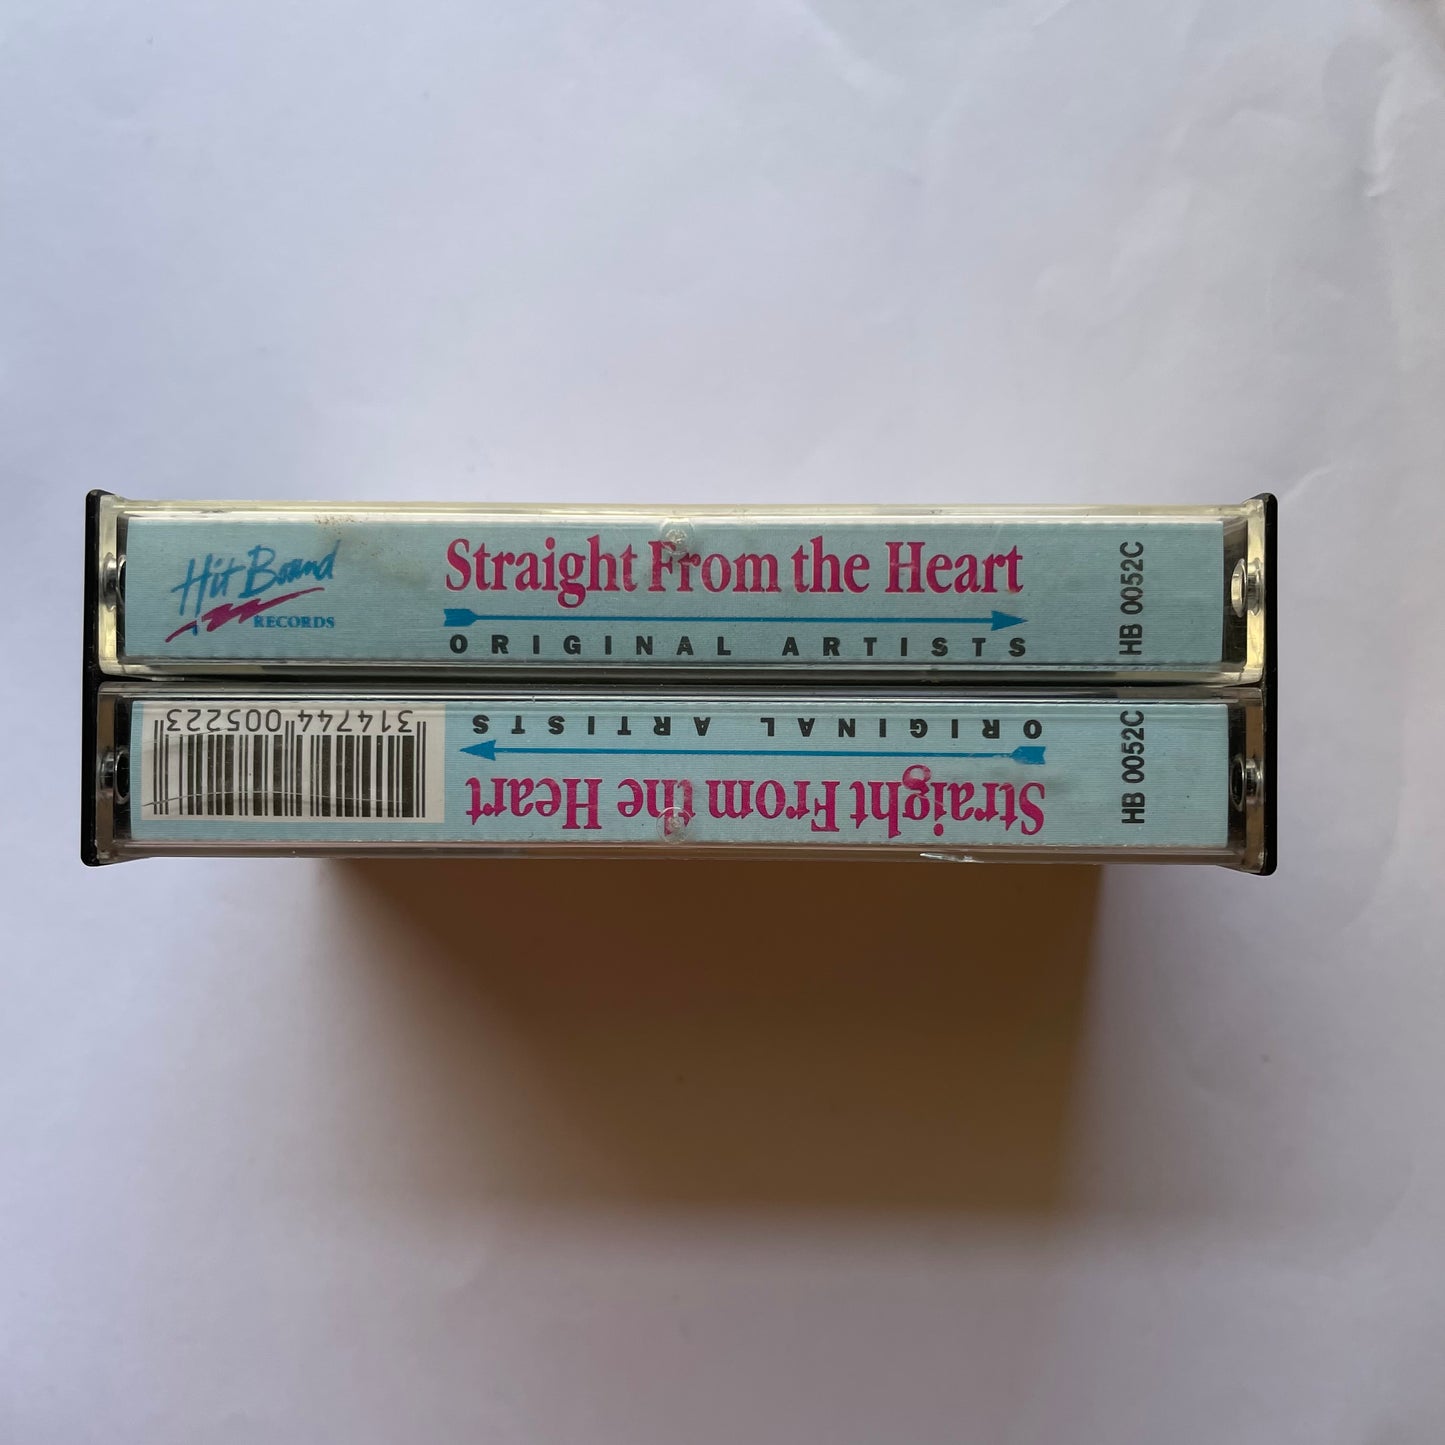 Tape Cassette Straight From The Heart titles